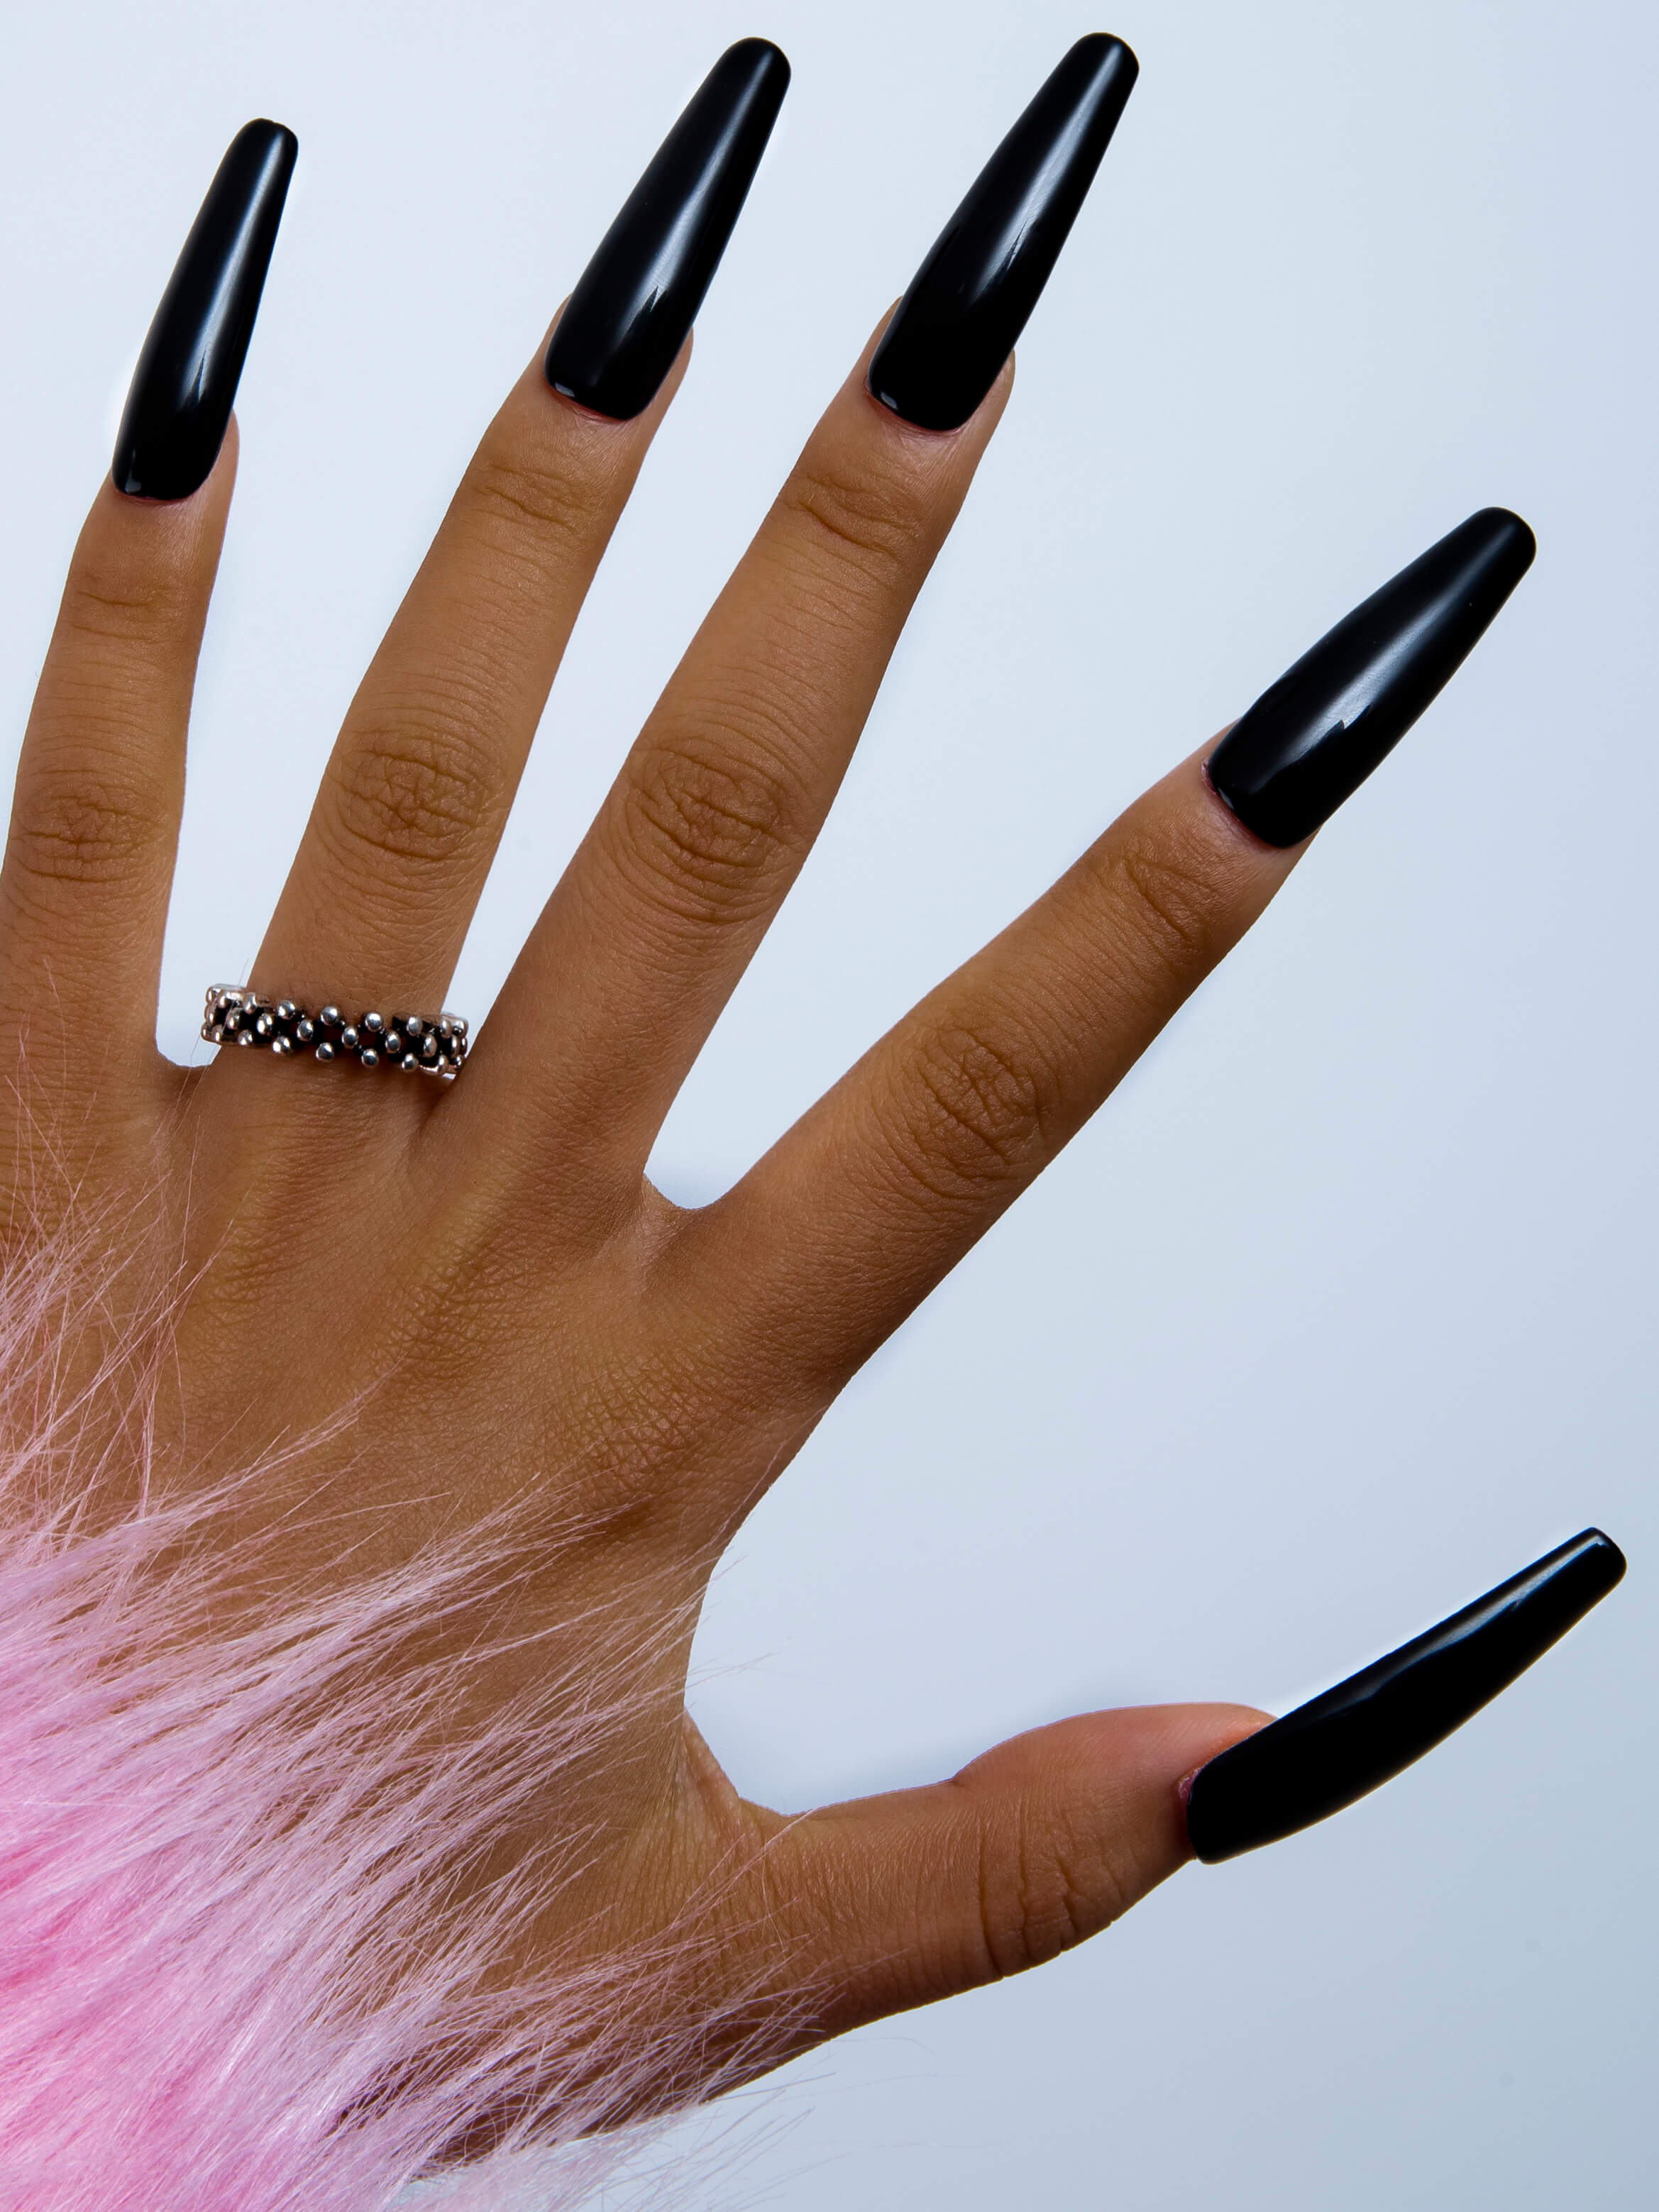 Hand with long, sleek black press-on acrylic nails from Lovful.com, wearing a silver ring and partially covered by a pink furry fabric, highlighting the 'Dark Angel' nail design.